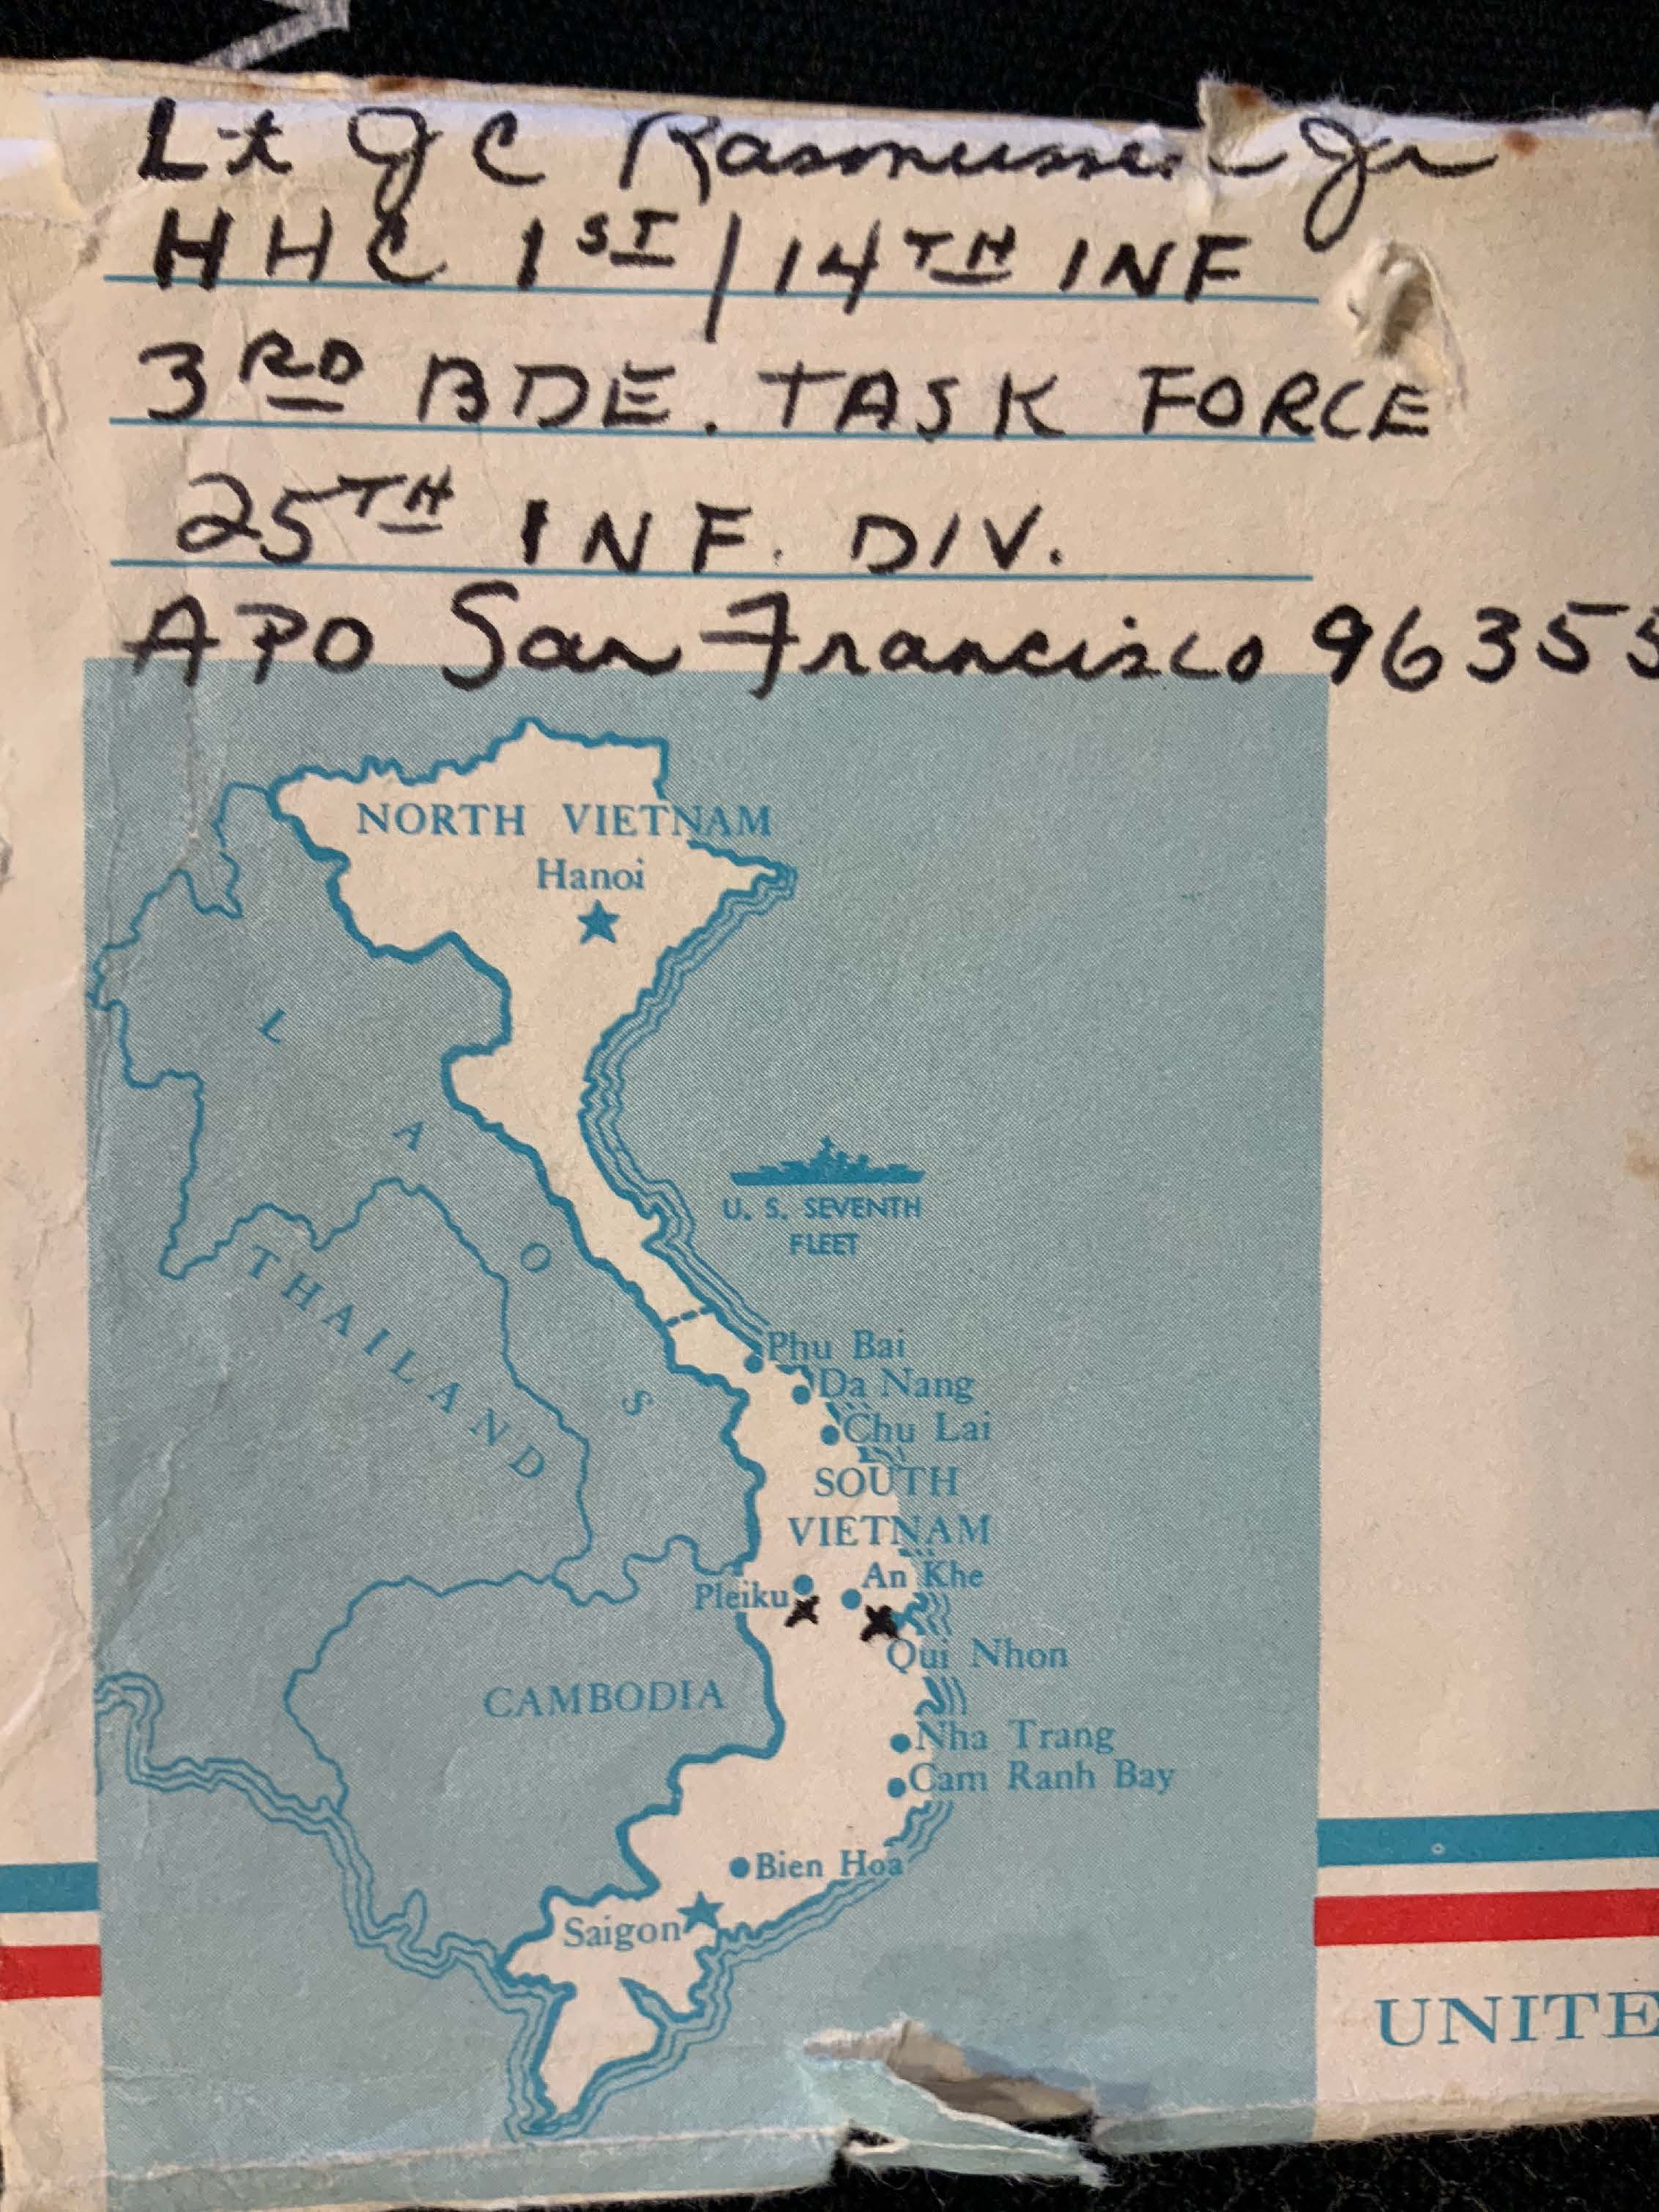 A map of Vietnam on an envelope with a San Francisco address